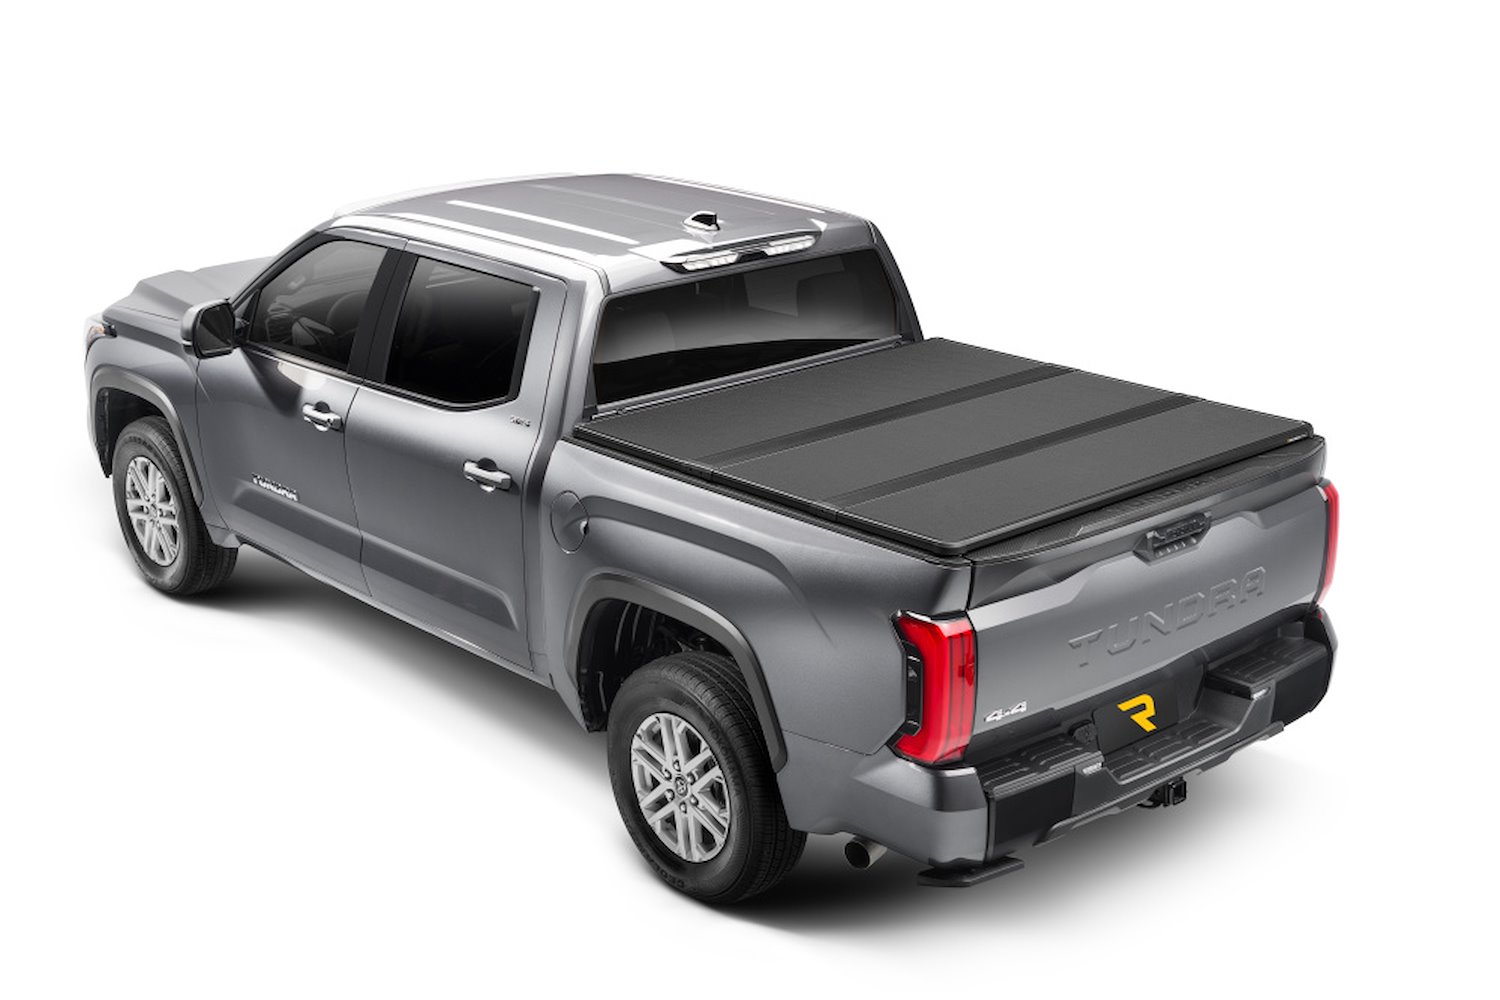 88460 Solid Fold ALX Tonneau Cover for 14-21 Tundra 5 ft.7 in. w/o Deck Rail Sys w/o Trl Spcl Edtn Strg Bxs